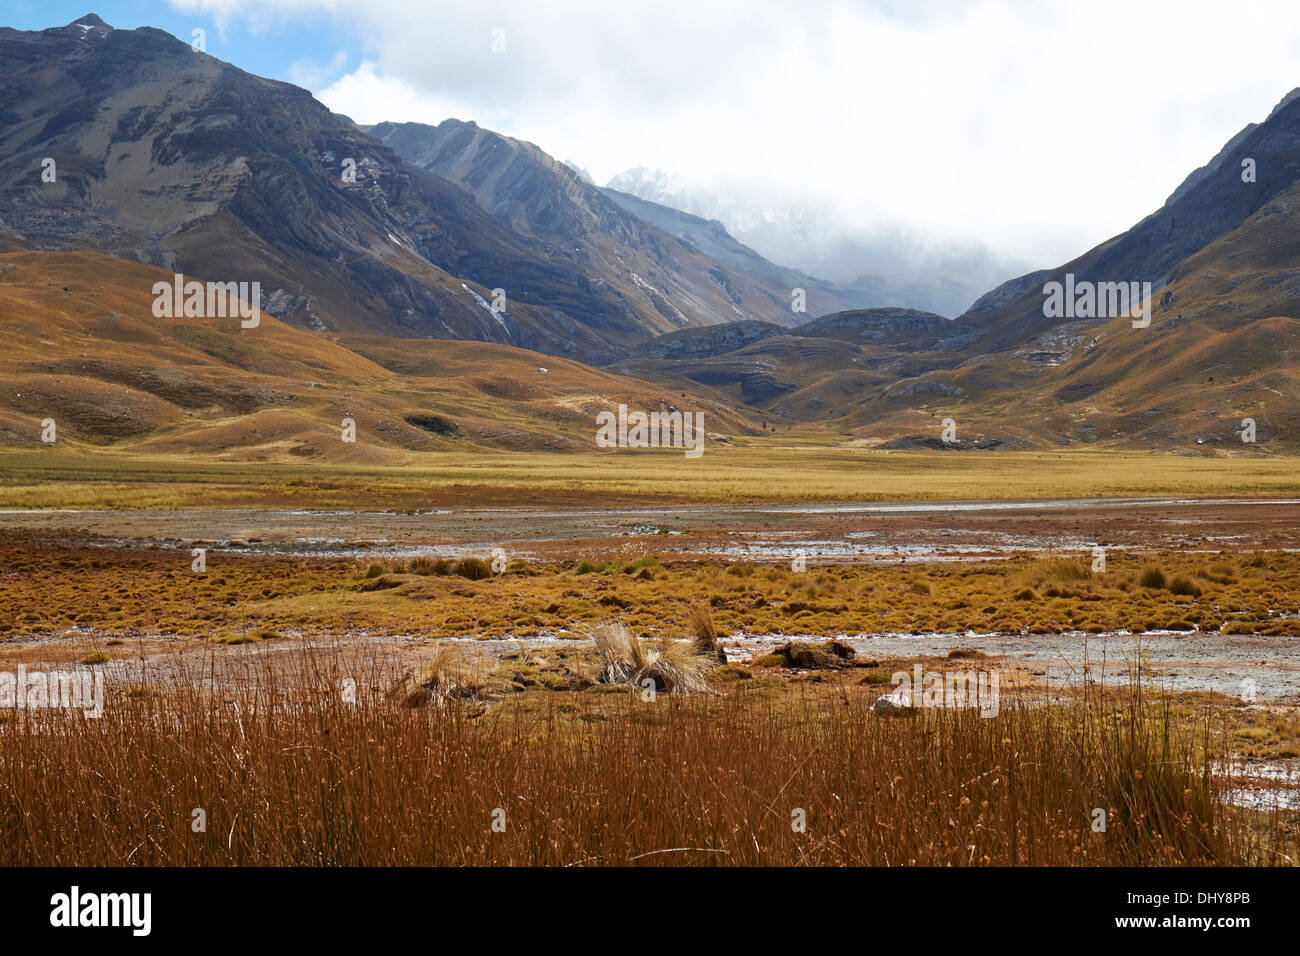 High mountains in the Rio Pumapampa valley in the Peruvian Andes, South America. Stock Photo